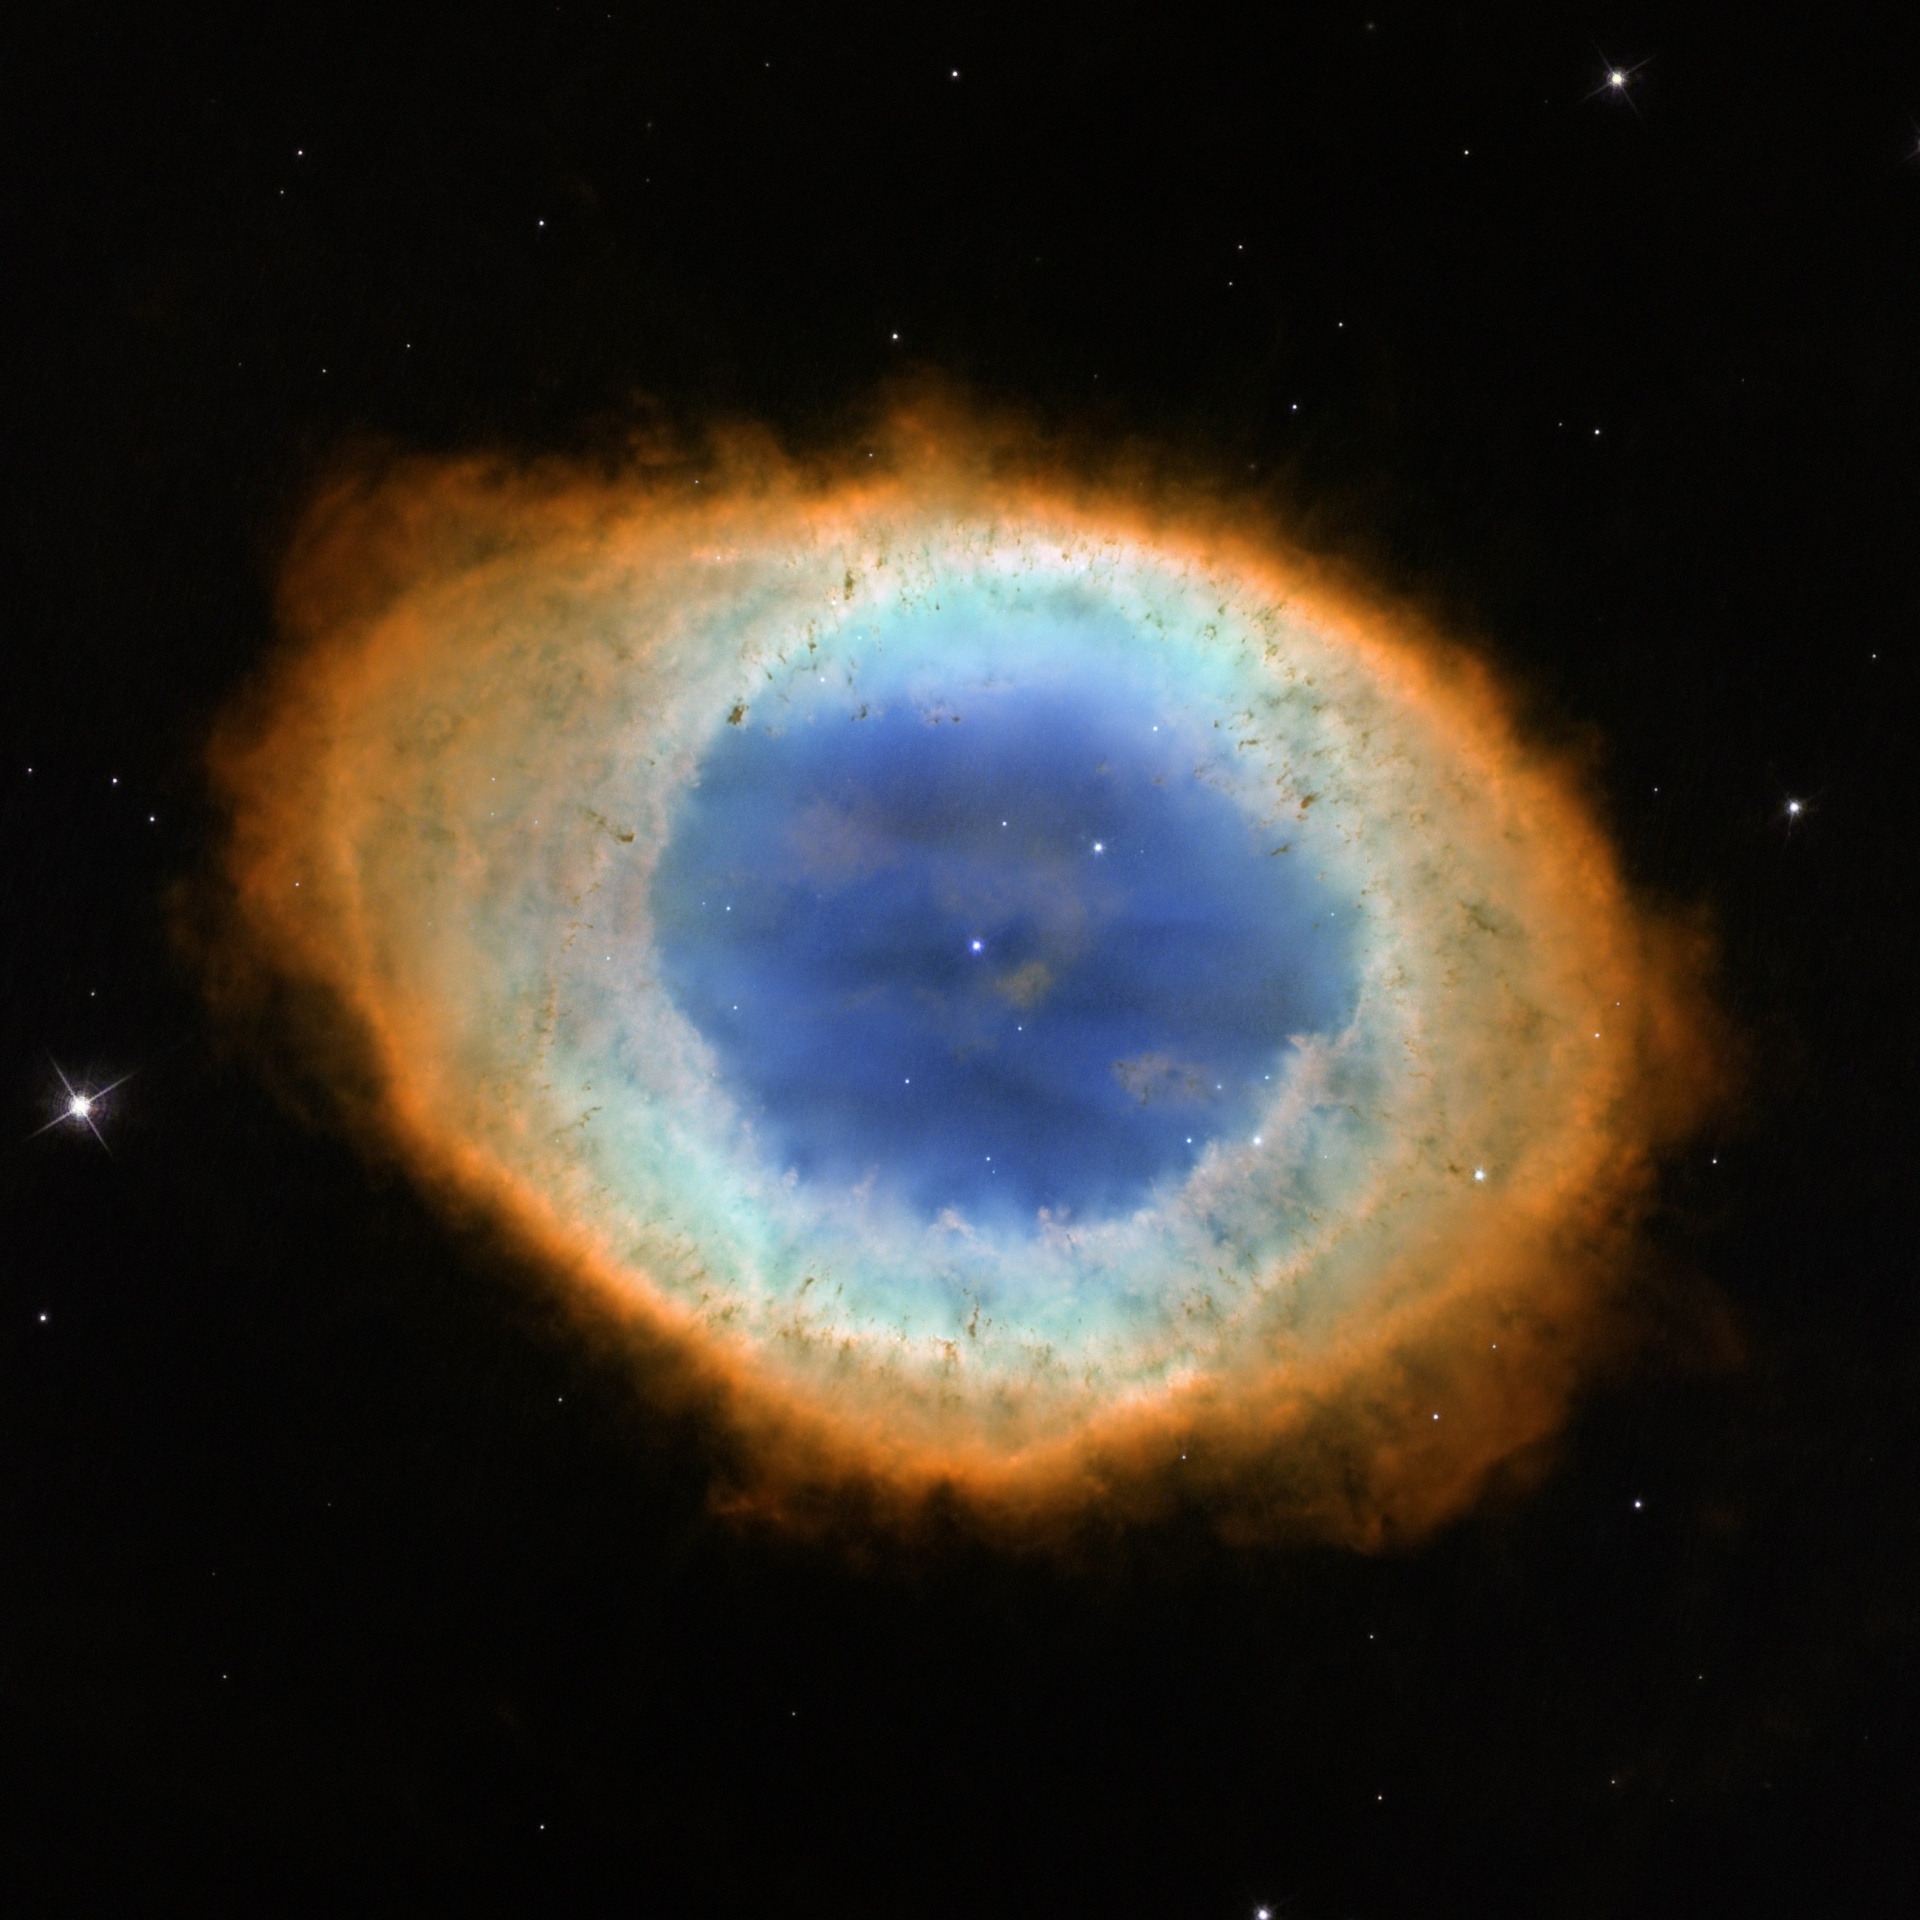 image from Video Astronomy